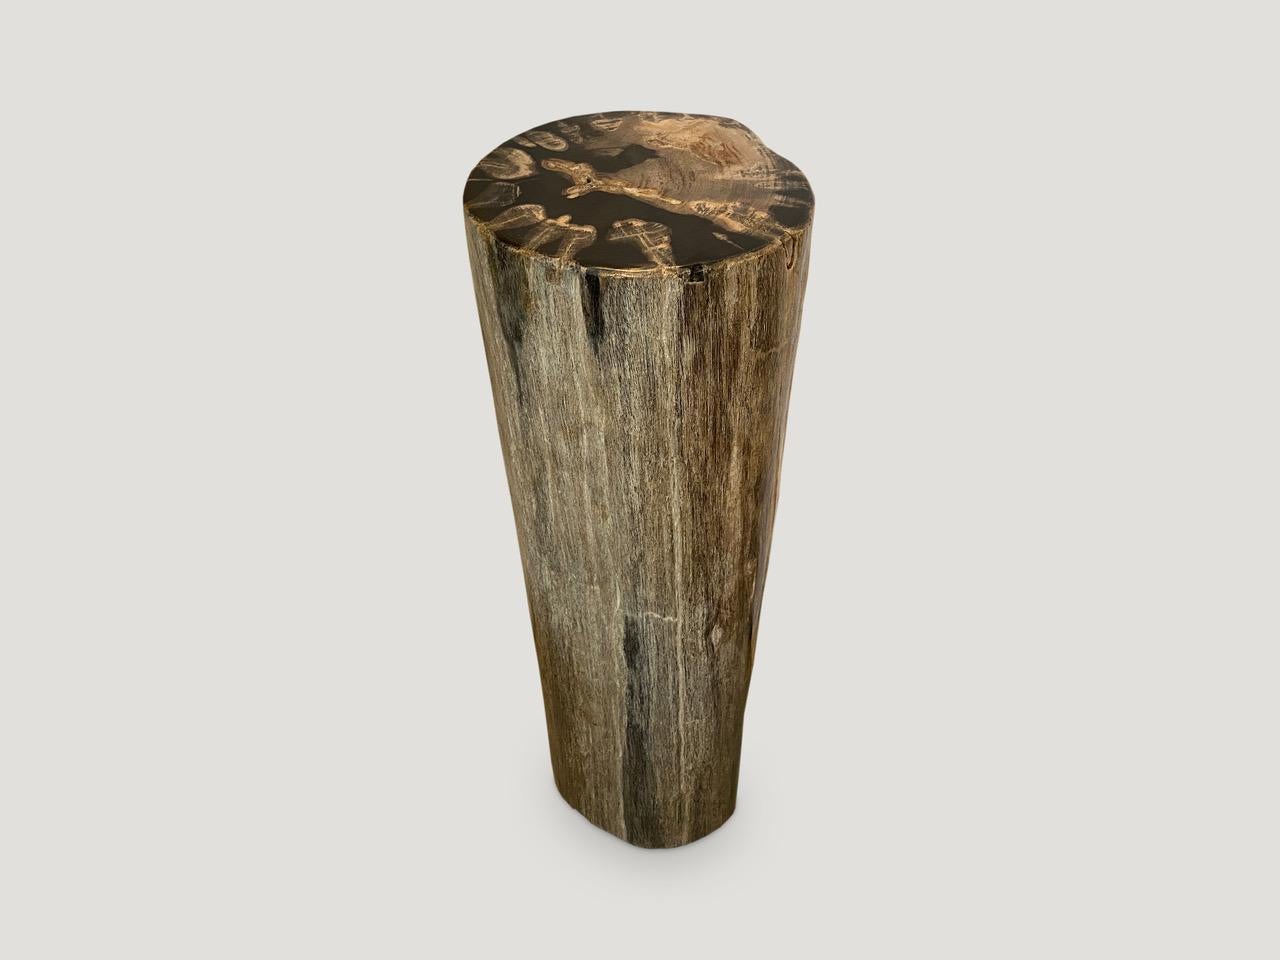 Beautiful earth tones on this high quality petrified wood pedestal or side table. It’s fascinating how Mother Nature produces these exquisite 40 million year old petrified teak logs with such contrasting colors and natural patterns throughout.